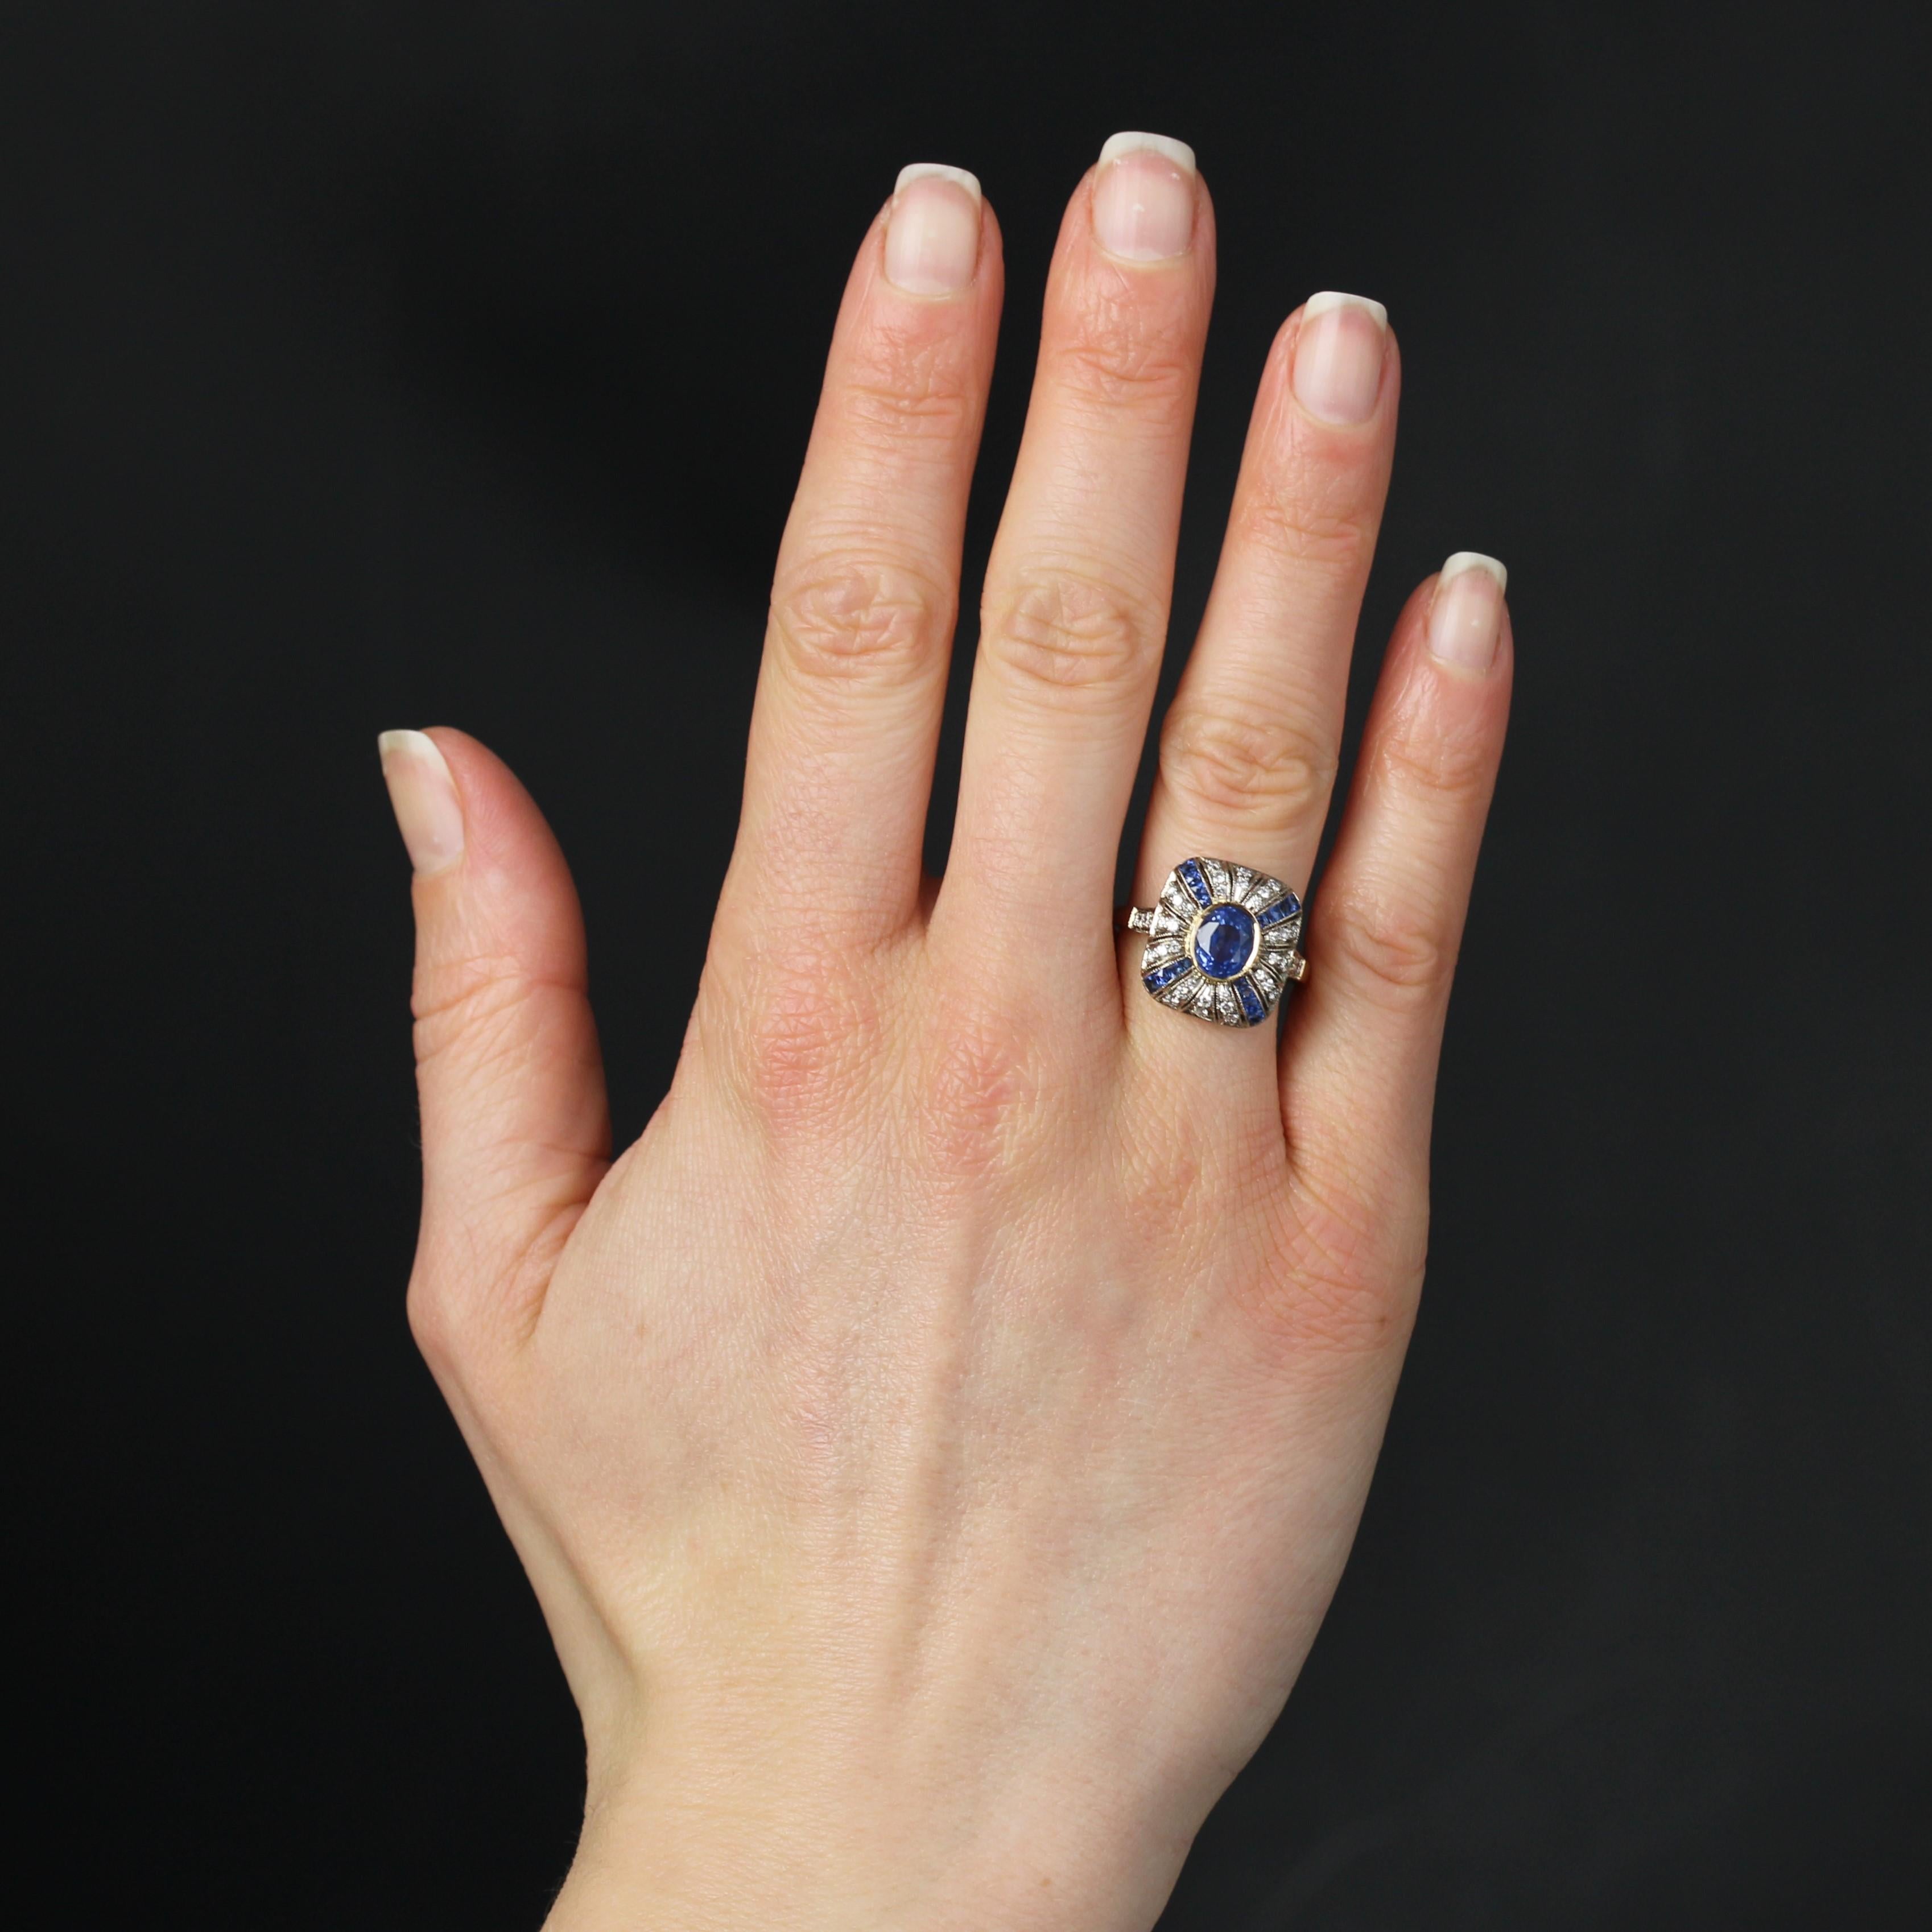 Ring in 18 karat yellow and white gold, eagle head hallmark.
An elegant Art Deco-style ring with a cushion-shaped setting featuring a sapphire in the center. The entire cushion is adorned with alternating lines of falling calibrated sapphires and